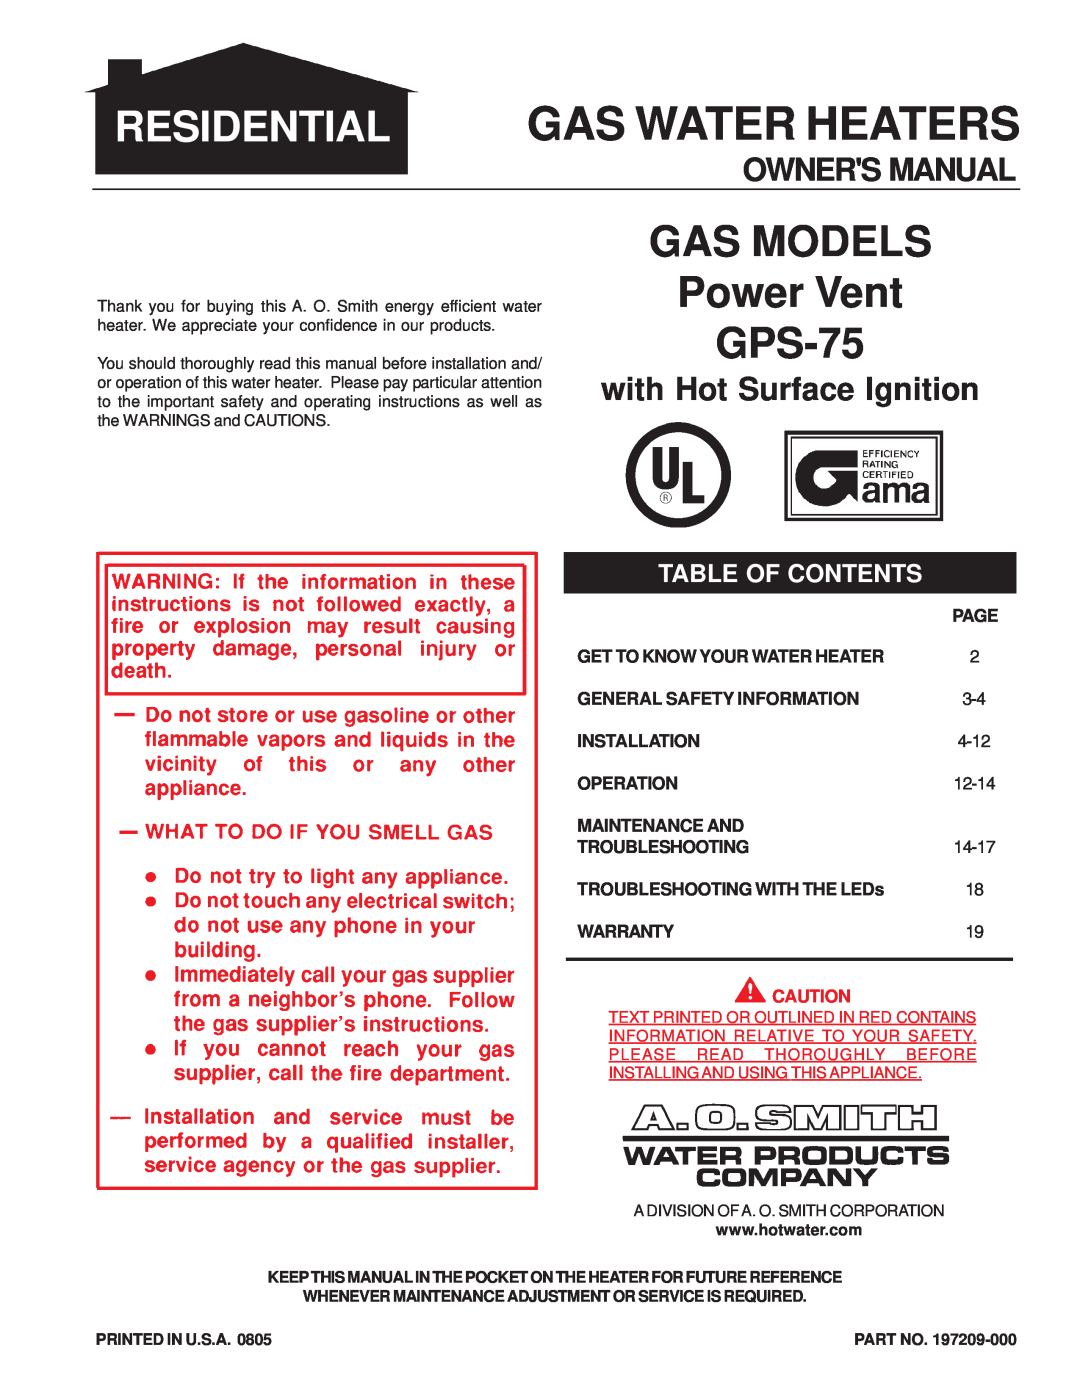 A.O. Smith GPS-75 owner manual Page, Get To Know Your Water Heater, General Safety Information, Installation, Operation 